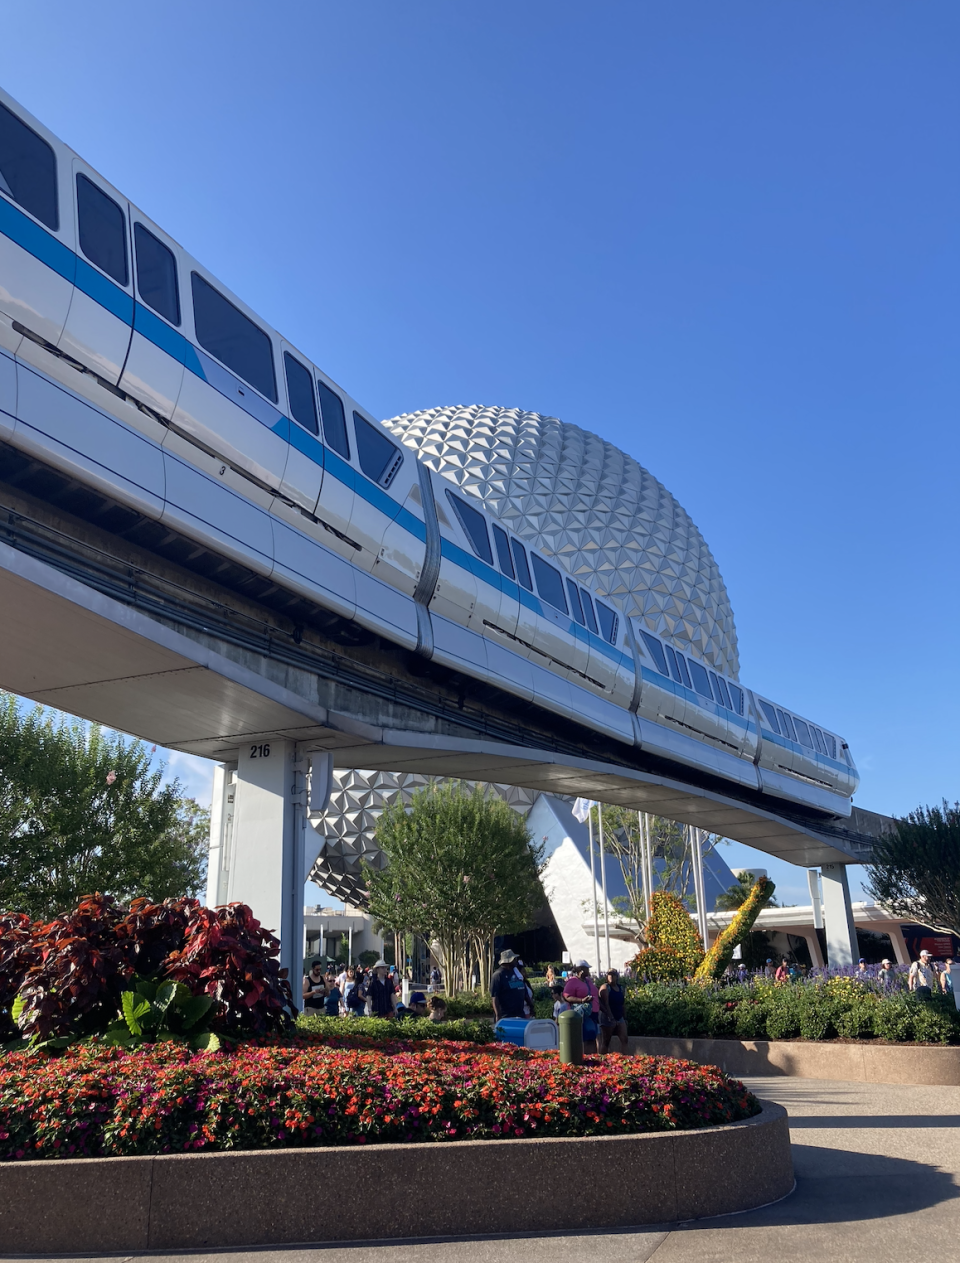 Monorail passes by Epcot's Spaceship Earth with vibrant flowers and visitors in the foreground